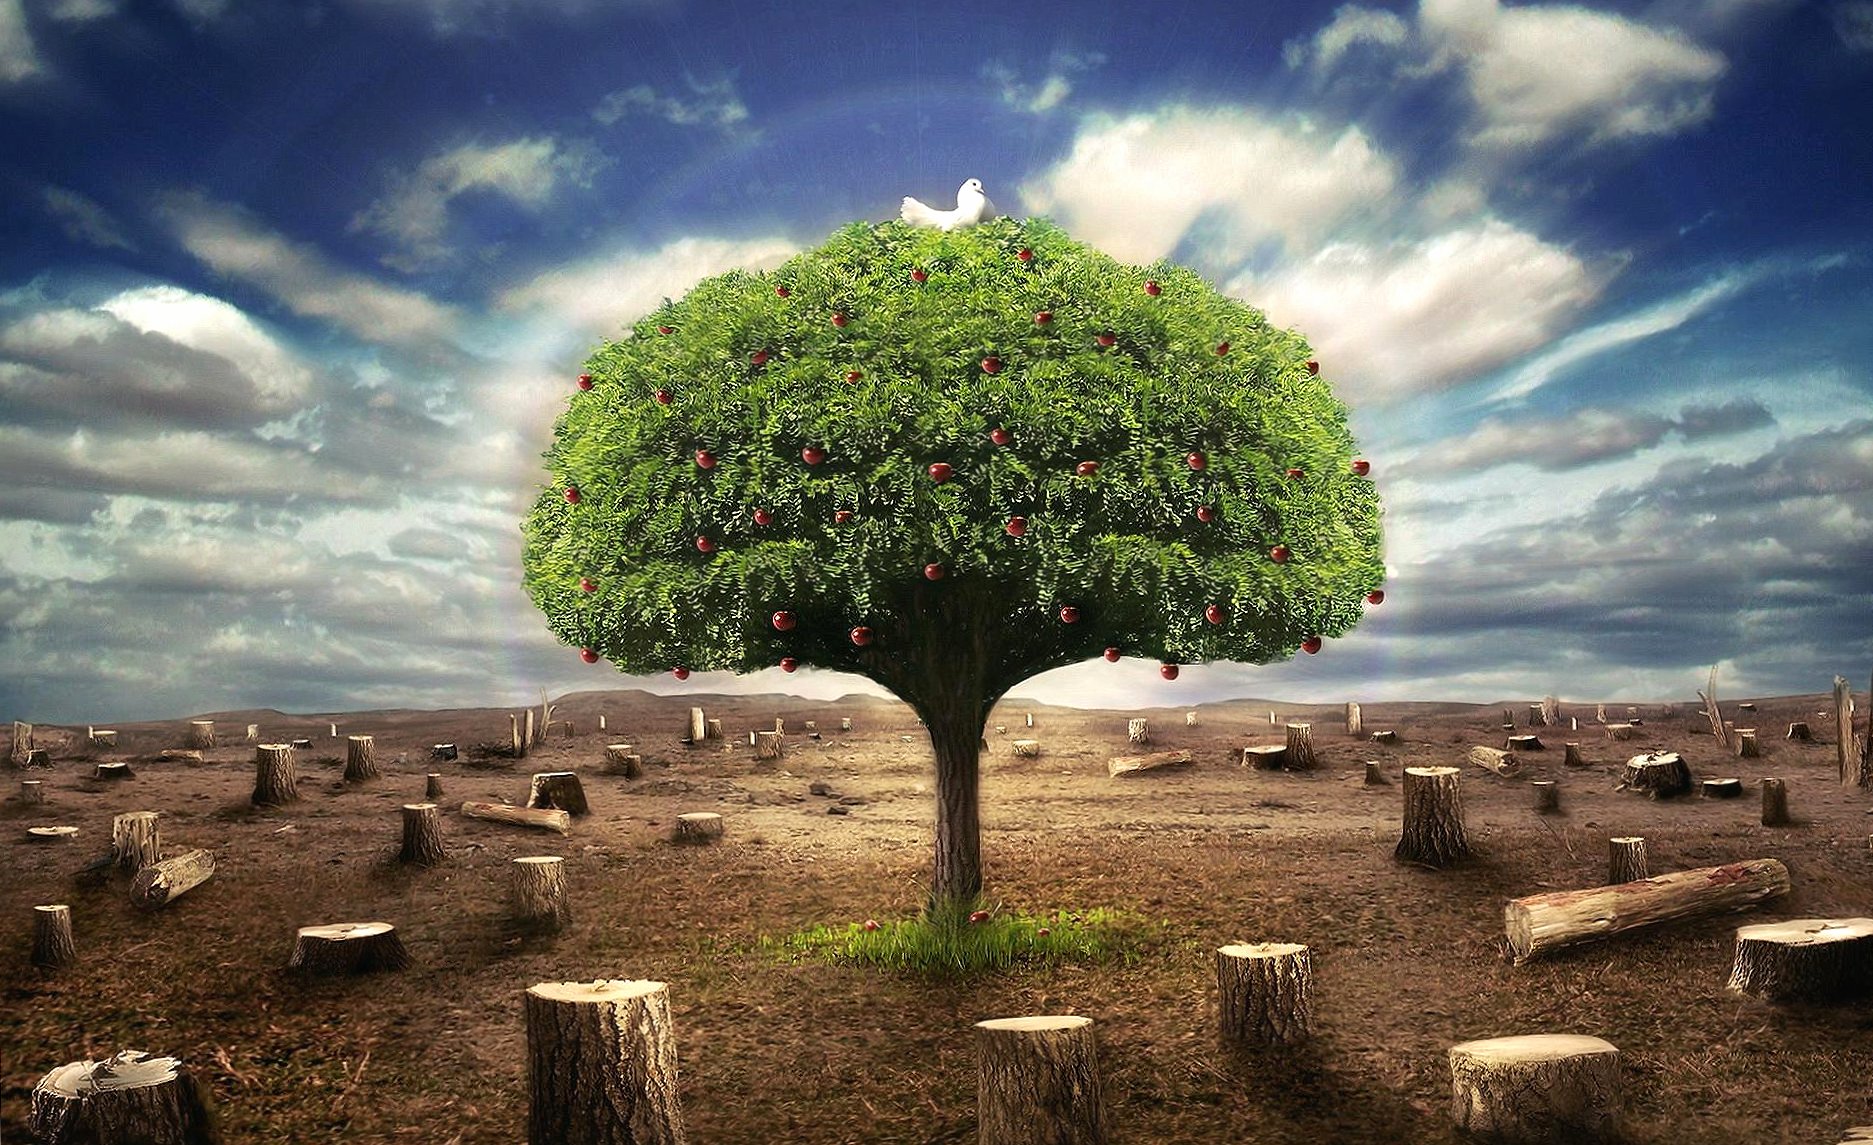 Only one tree digital art wallpapers HD quality